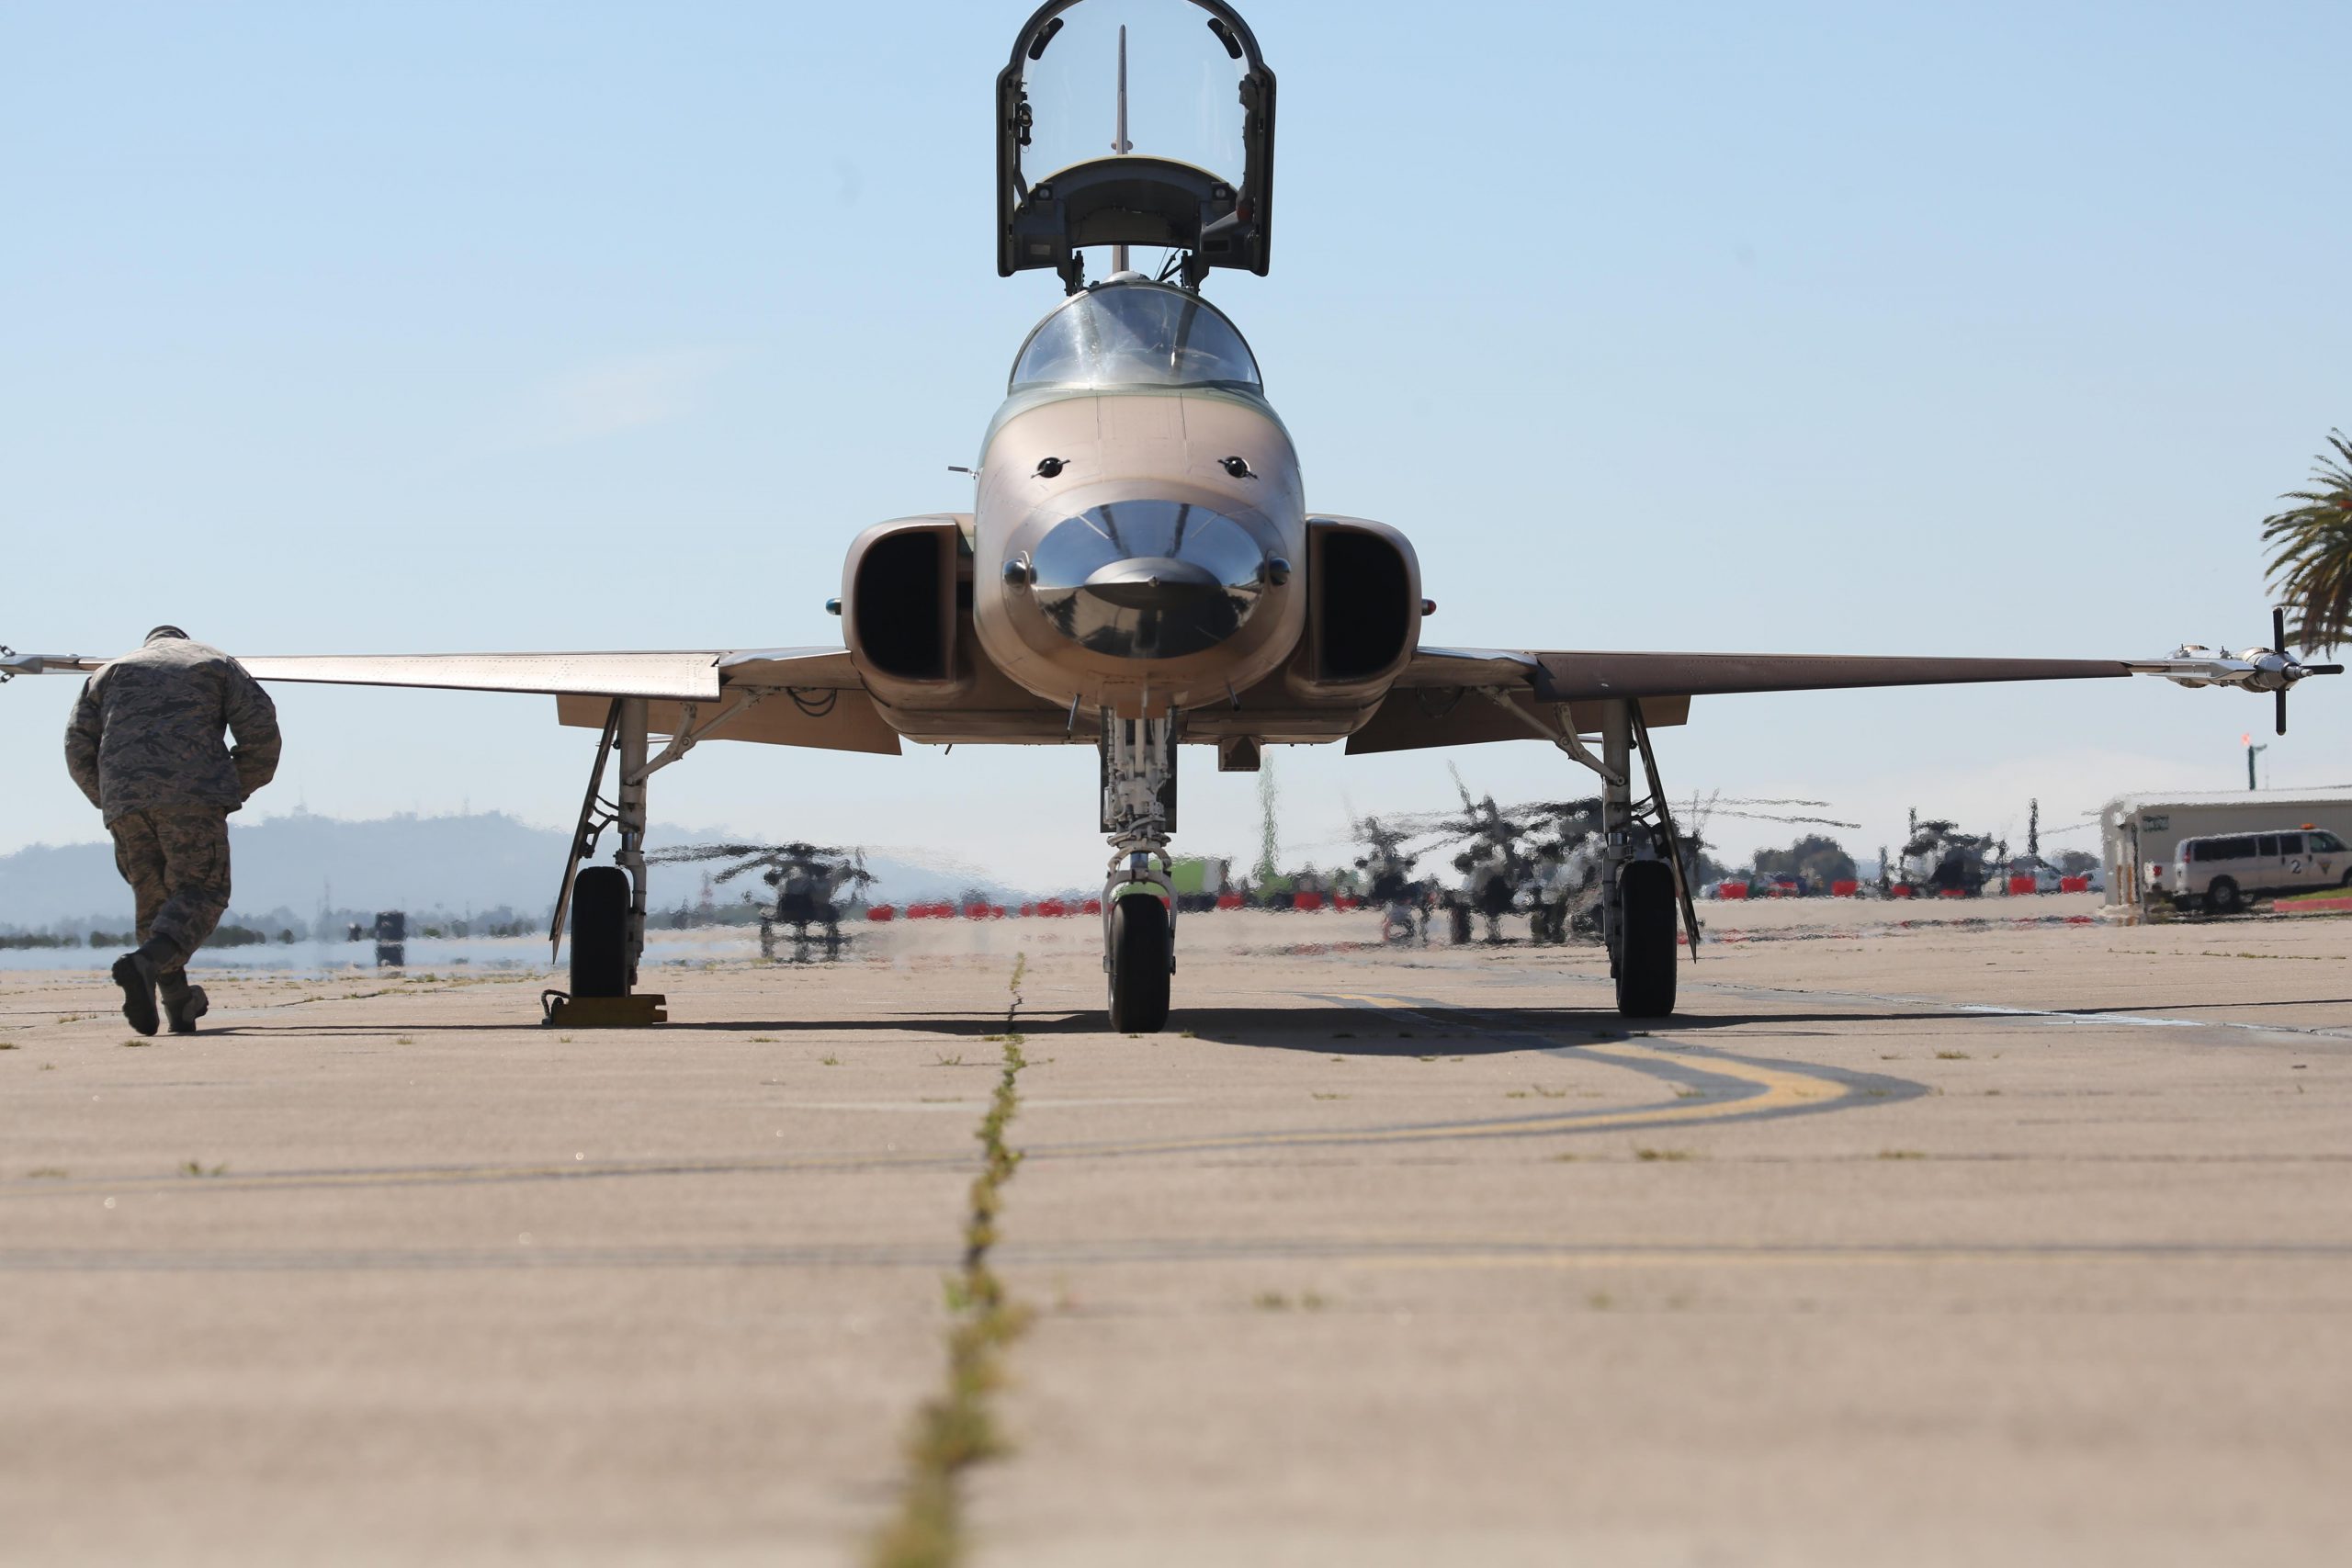 F-5N Tiger II fighter jets with Marine Fighter Training Squadron 401 train with Marine Fighter Attack Squadron 314 and the Air Force’s 310th Fighter Squadron at Marine Corps Air Station Miramar, Calif., March 16, 2017. This training allowed both services to experience different flight tactics and train with different aircraft. Marine Corps photo by Lance Cpl. Jake McClung. -